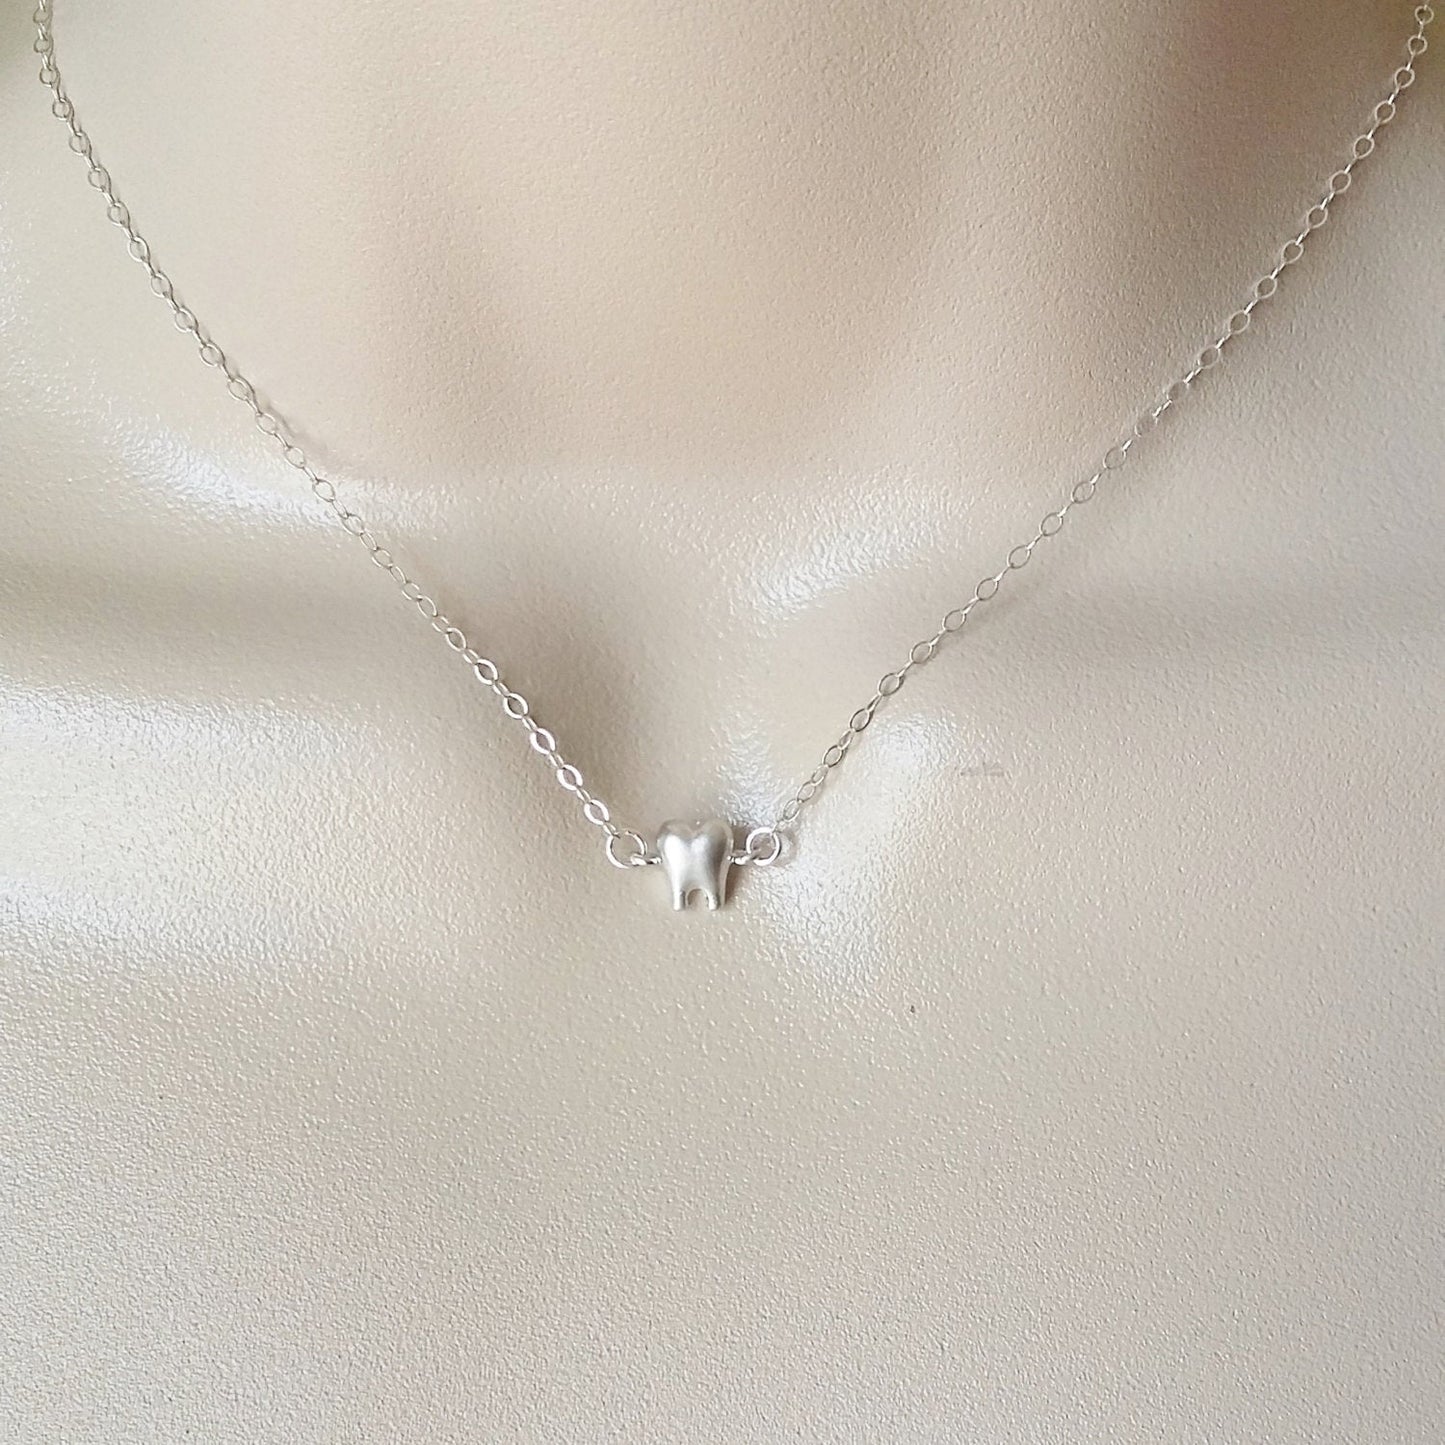 Tooth Necklace, Tiny Silver Tooth Necklace, Dentist Necklace, Sterling ...